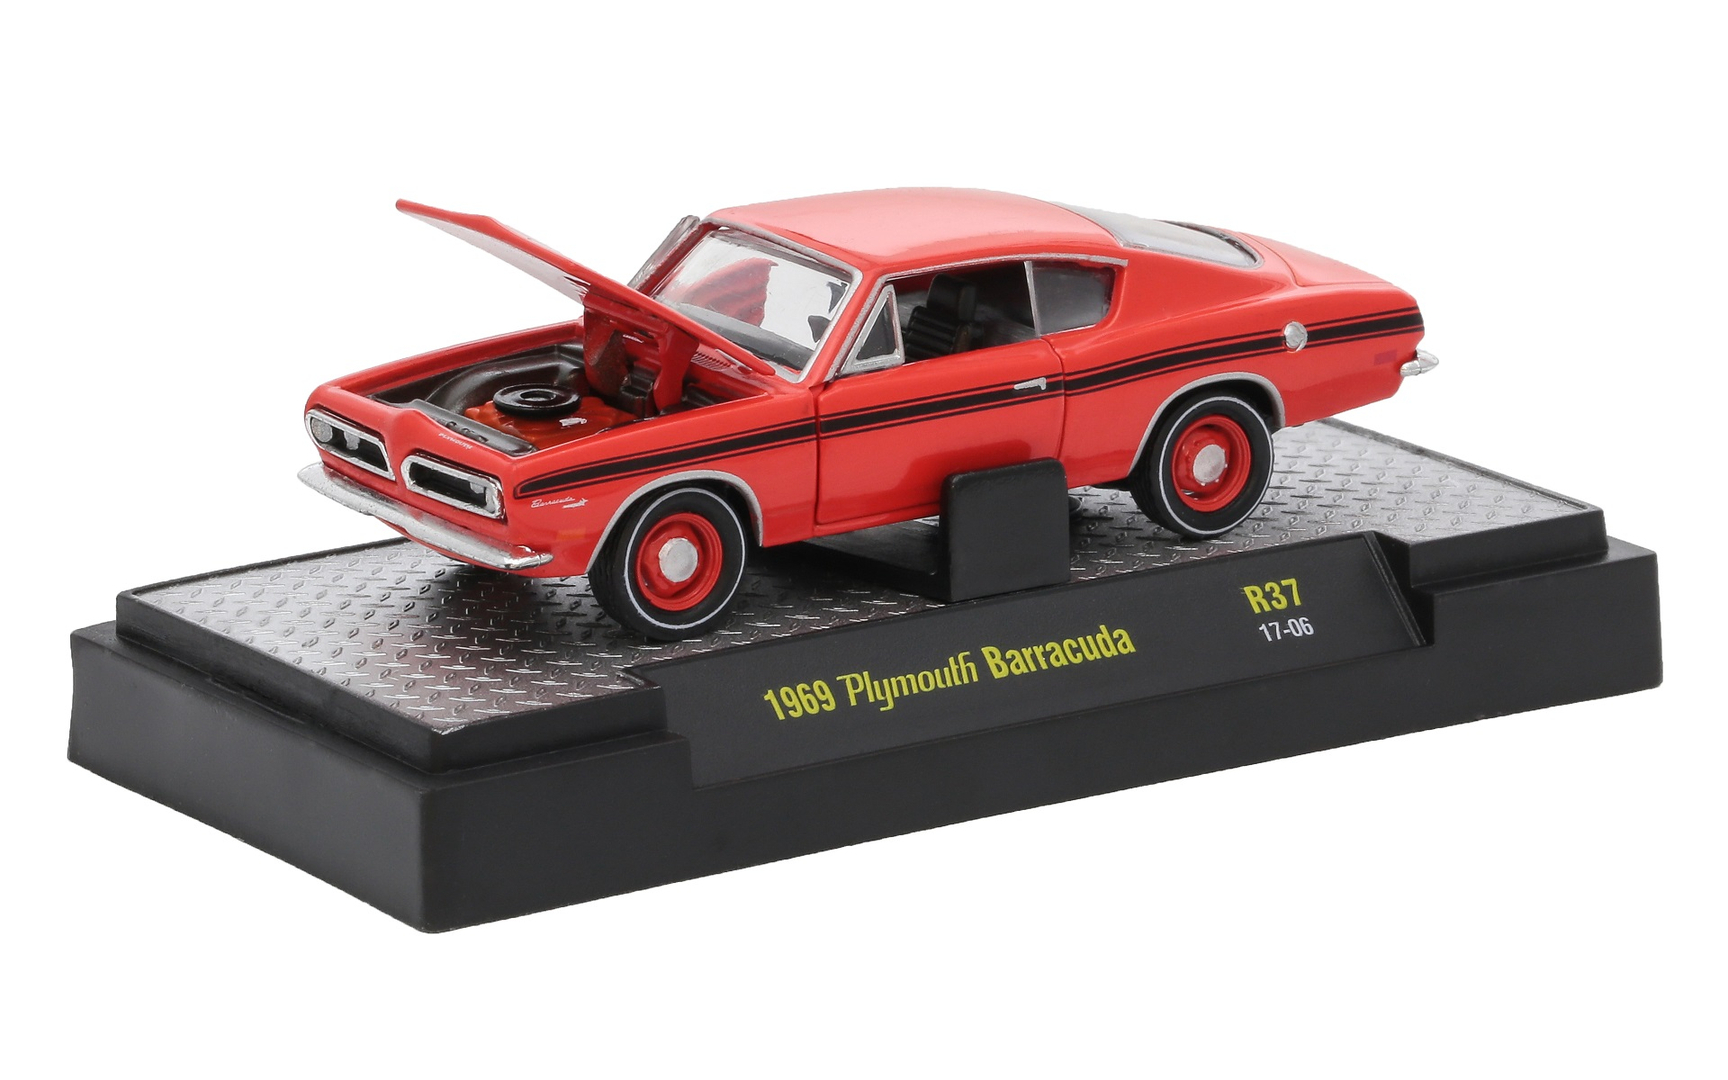 M2 Machines 1:64 DETROIT-MUSCLE RELEASE 35 1969 PLYMOUTH CUDA 340 GREEN